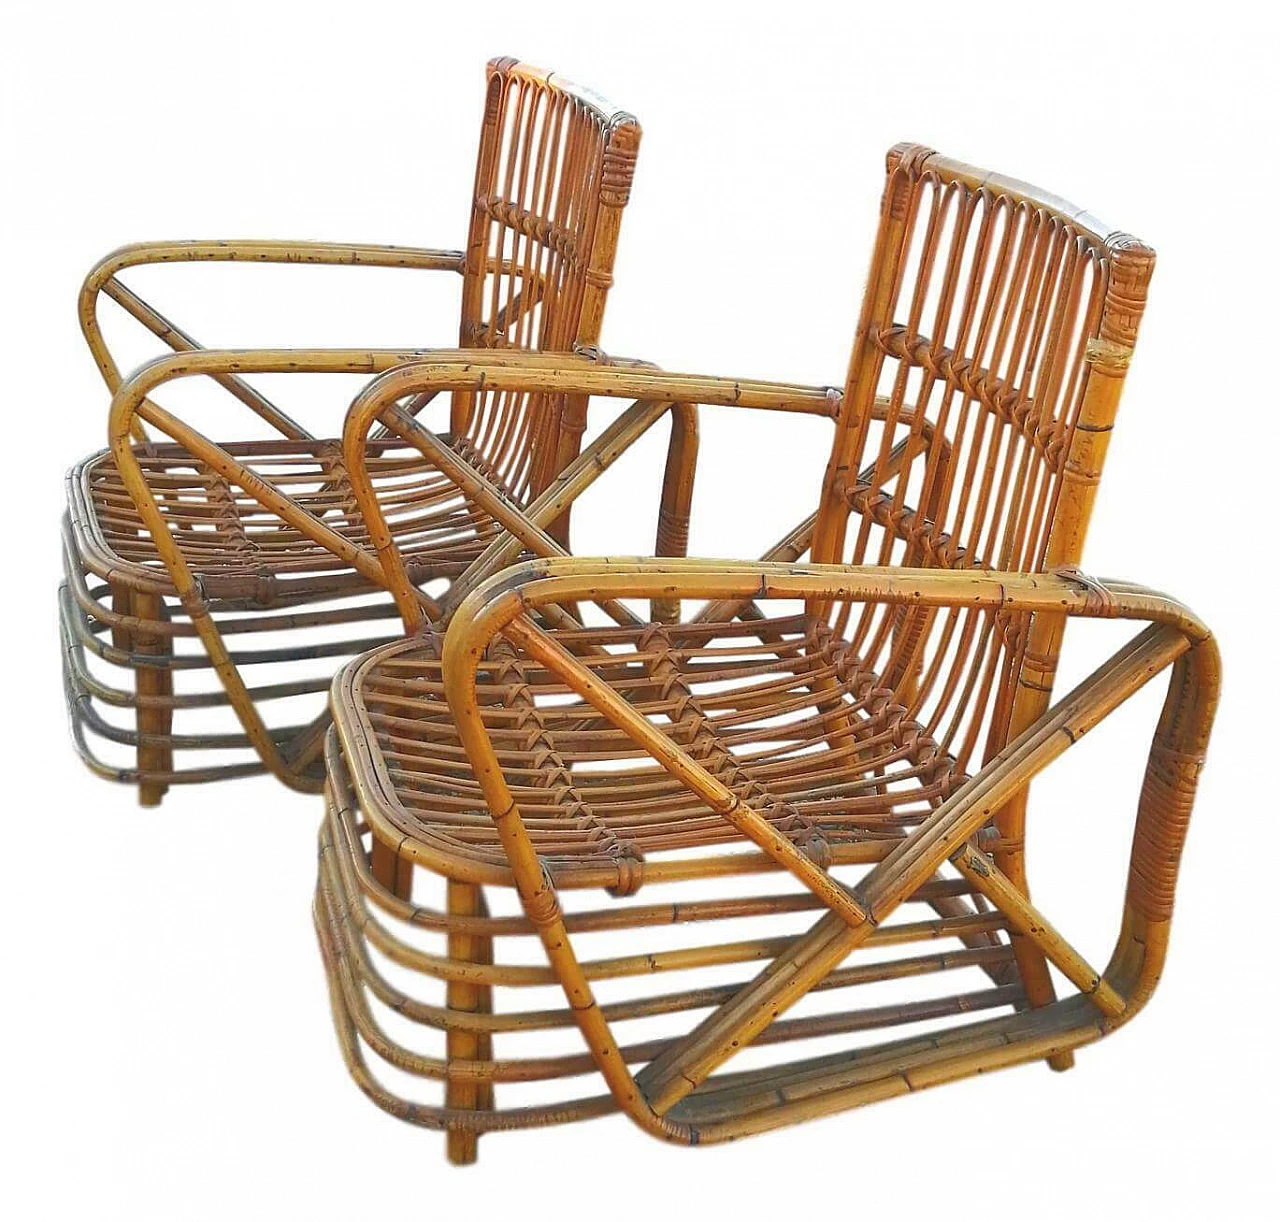 Pair of rattan bamboo armchairs and coffee table by Paul Frankl, 1940s 1165279